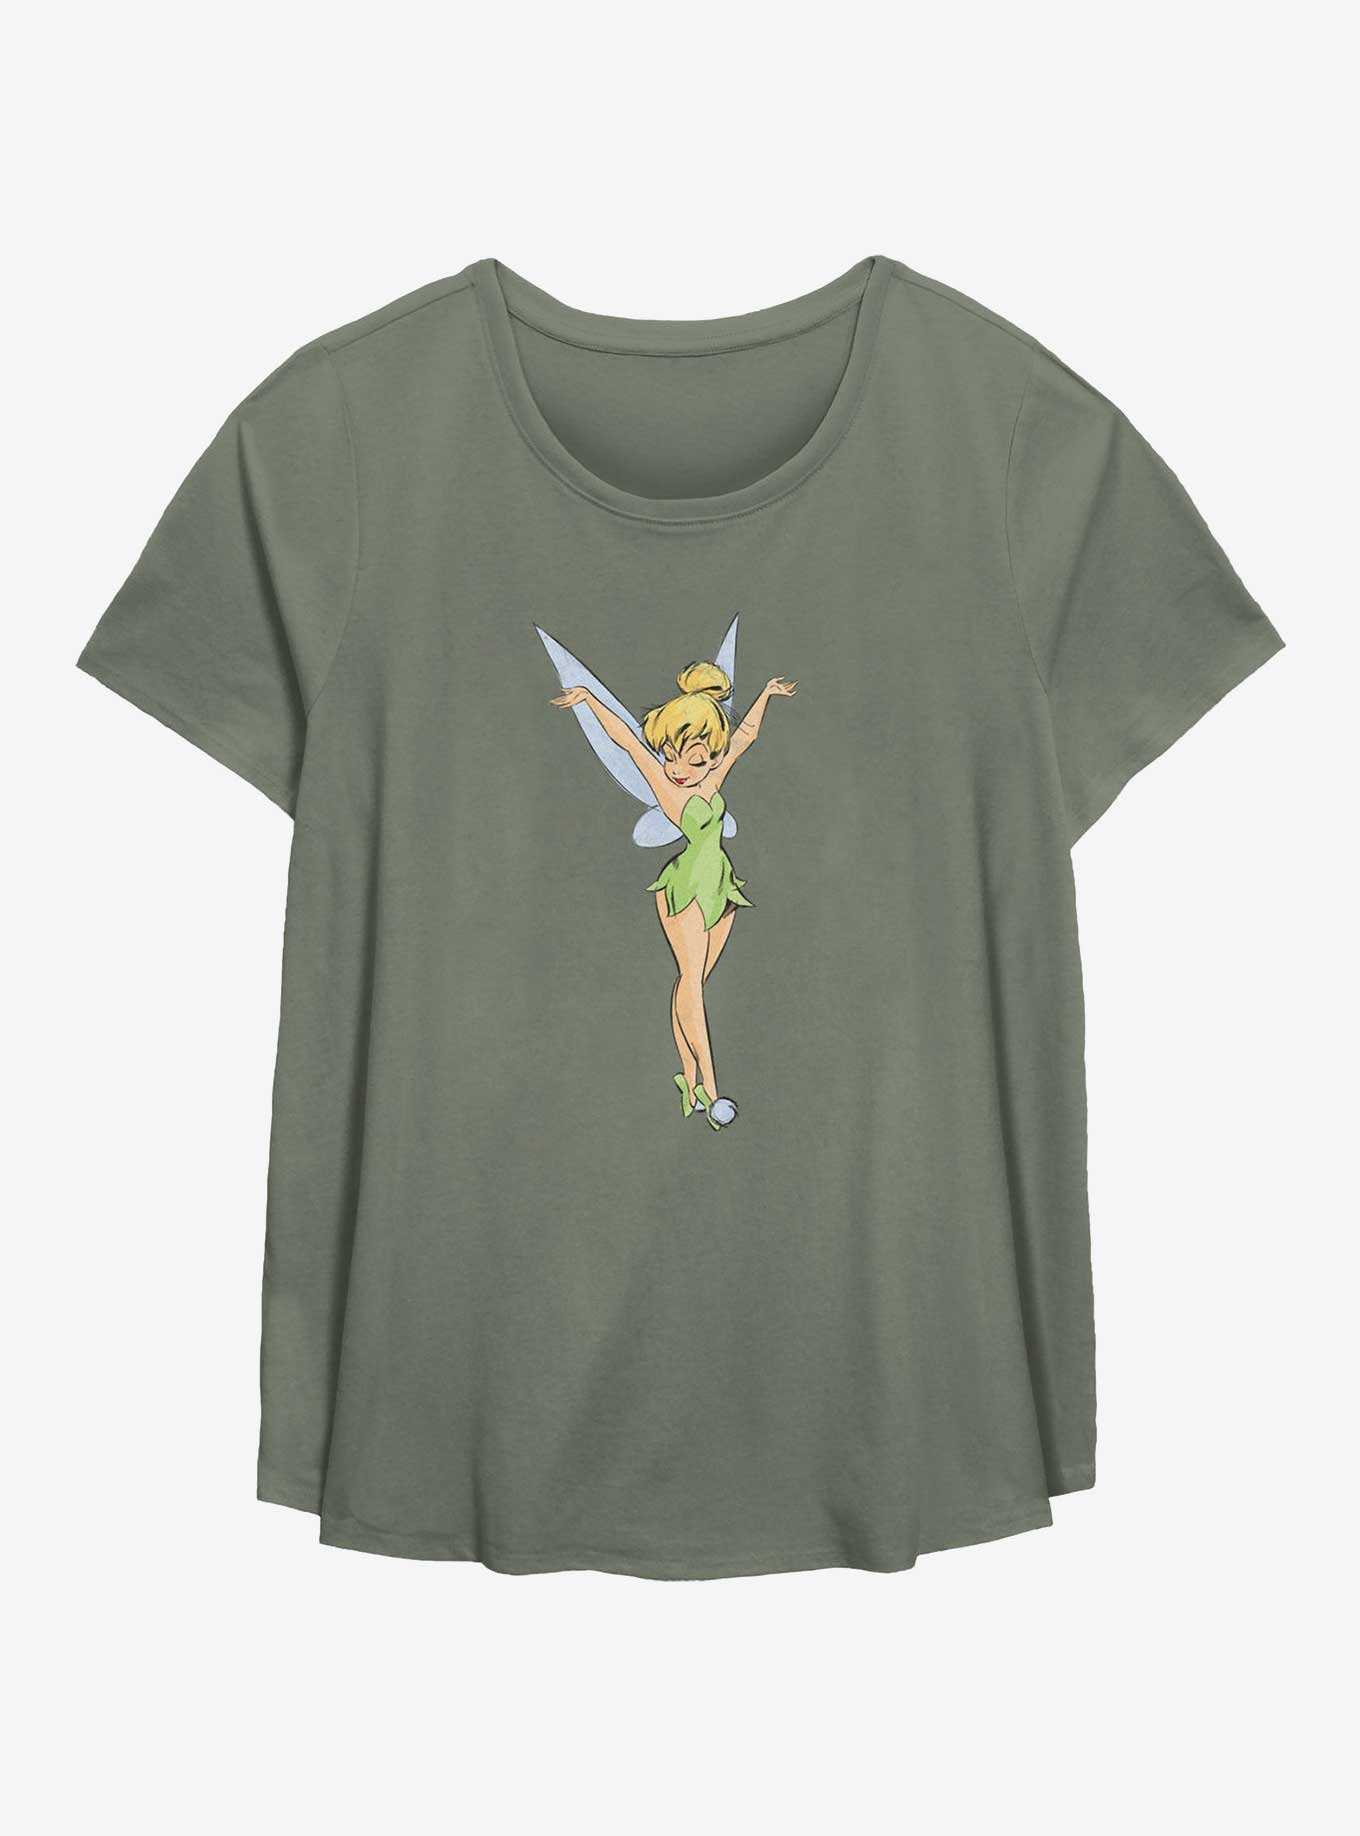 OFFICIAL Peter Pan Merchandise, Shirts & More | Hot Topic | T-Shirts